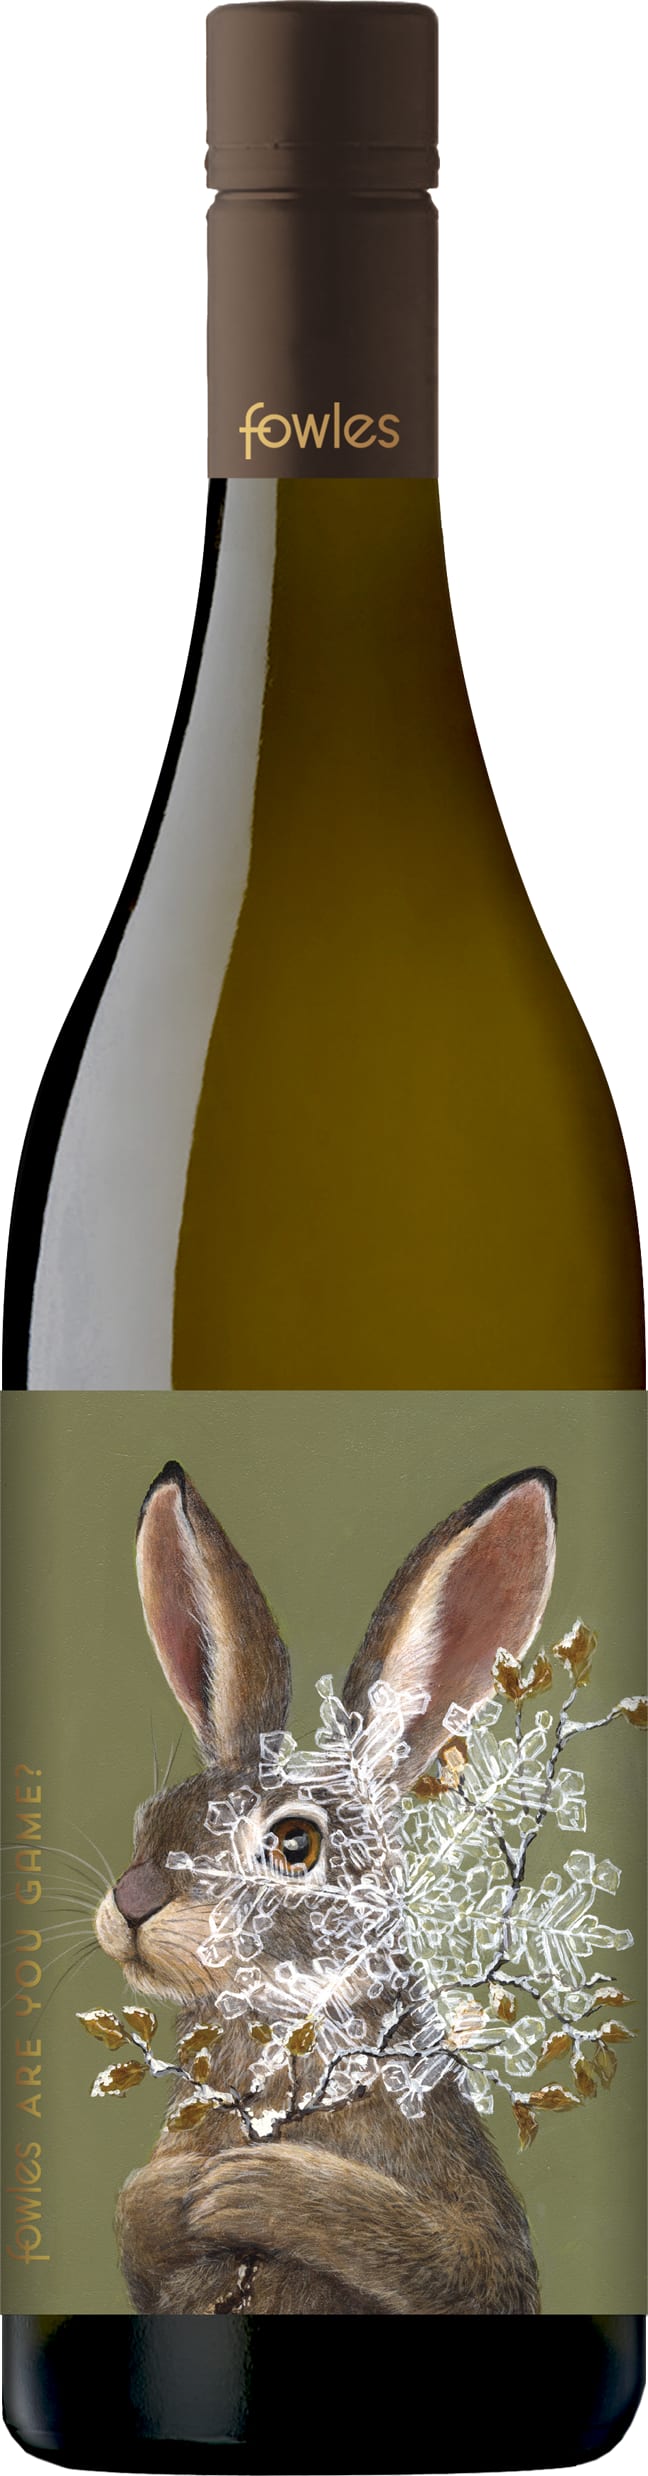 Fowles Wine Are You Game? Chardonnay 2021 75cl - Buy Fowles Wine Wines from GREAT WINES DIRECT wine shop